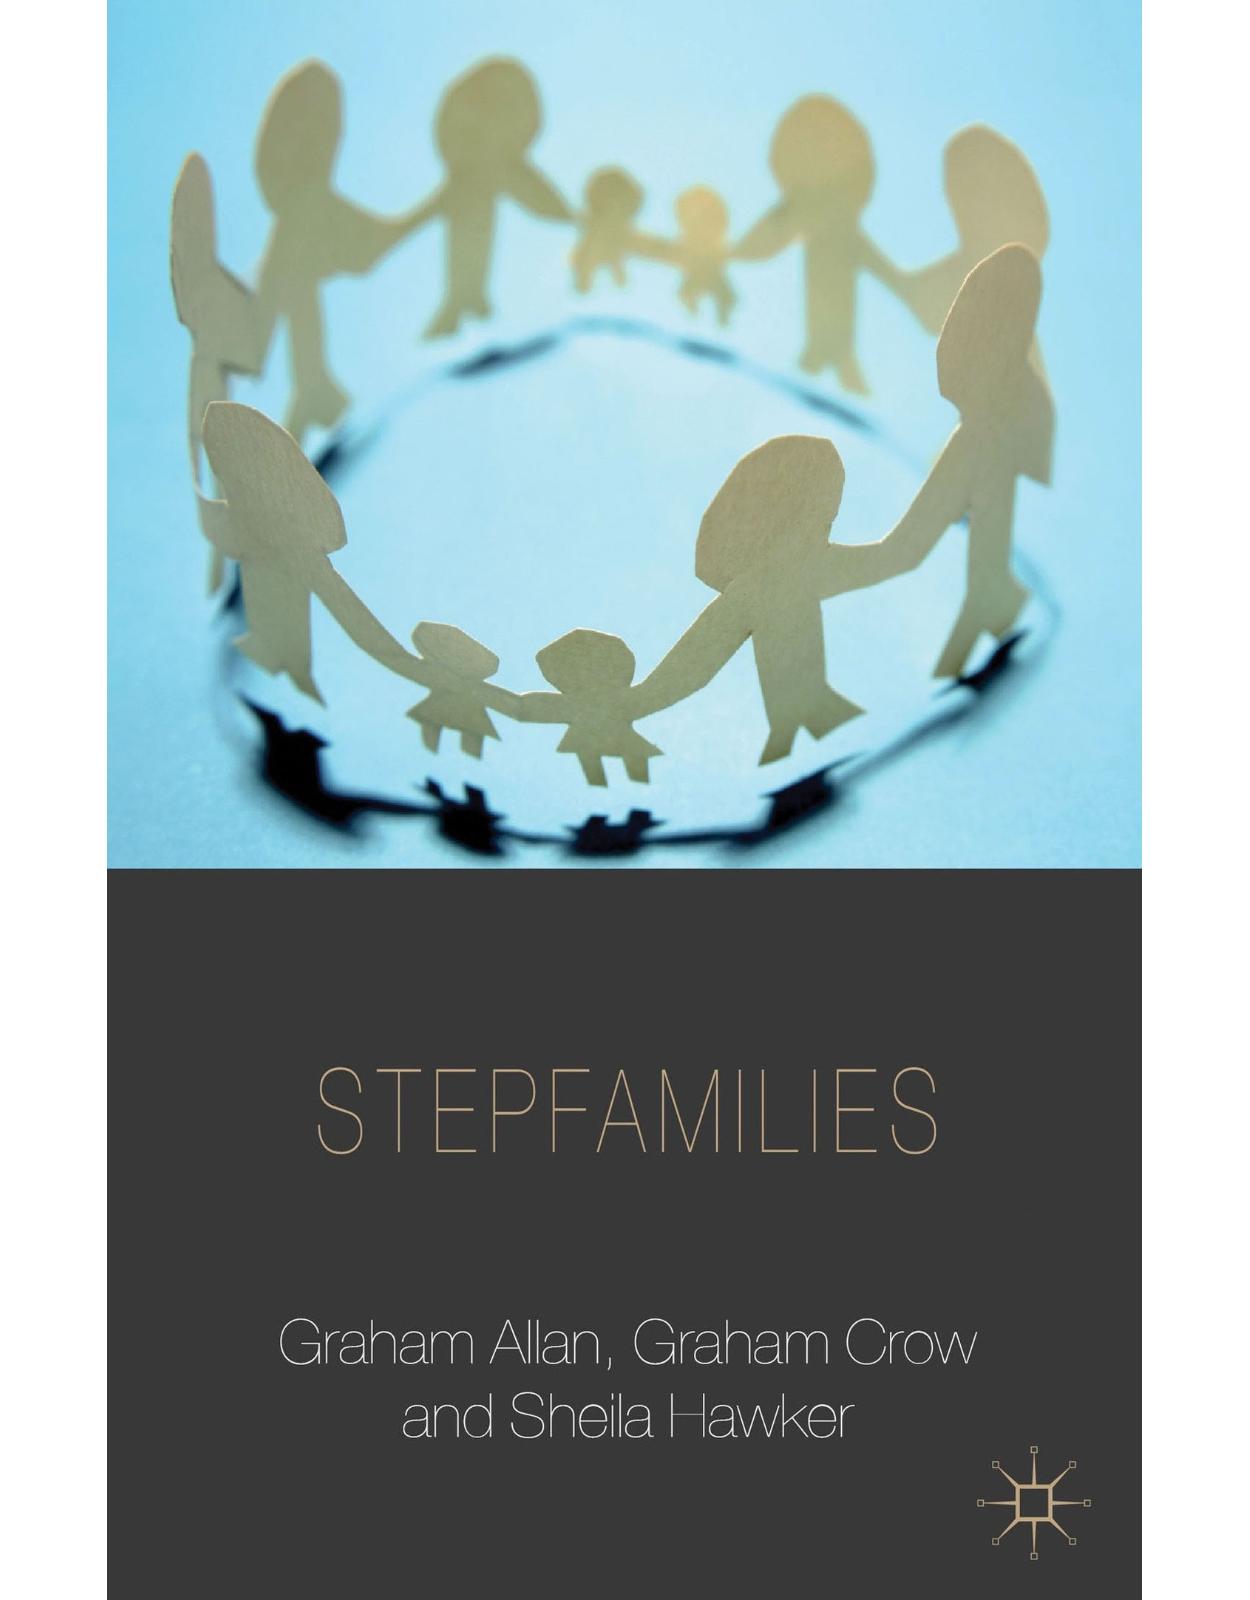 Stepfamilies (Palgrave Macmillan Studies in Family and Intimate Life) 